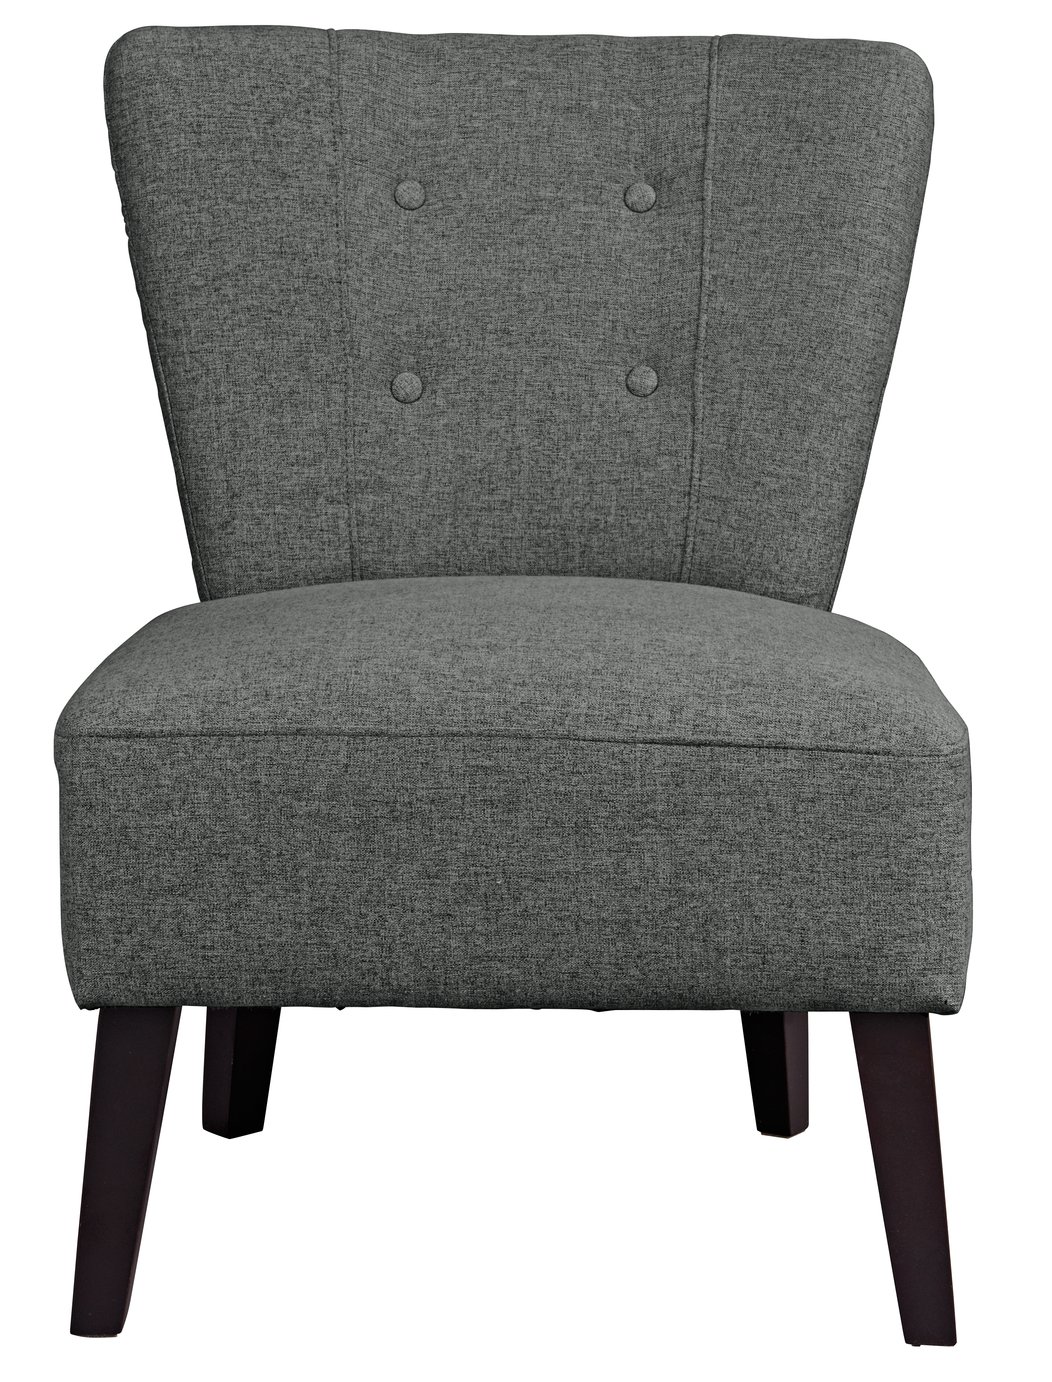 Argos Home Delilah Fabric Cocktail Chair - Charcoal